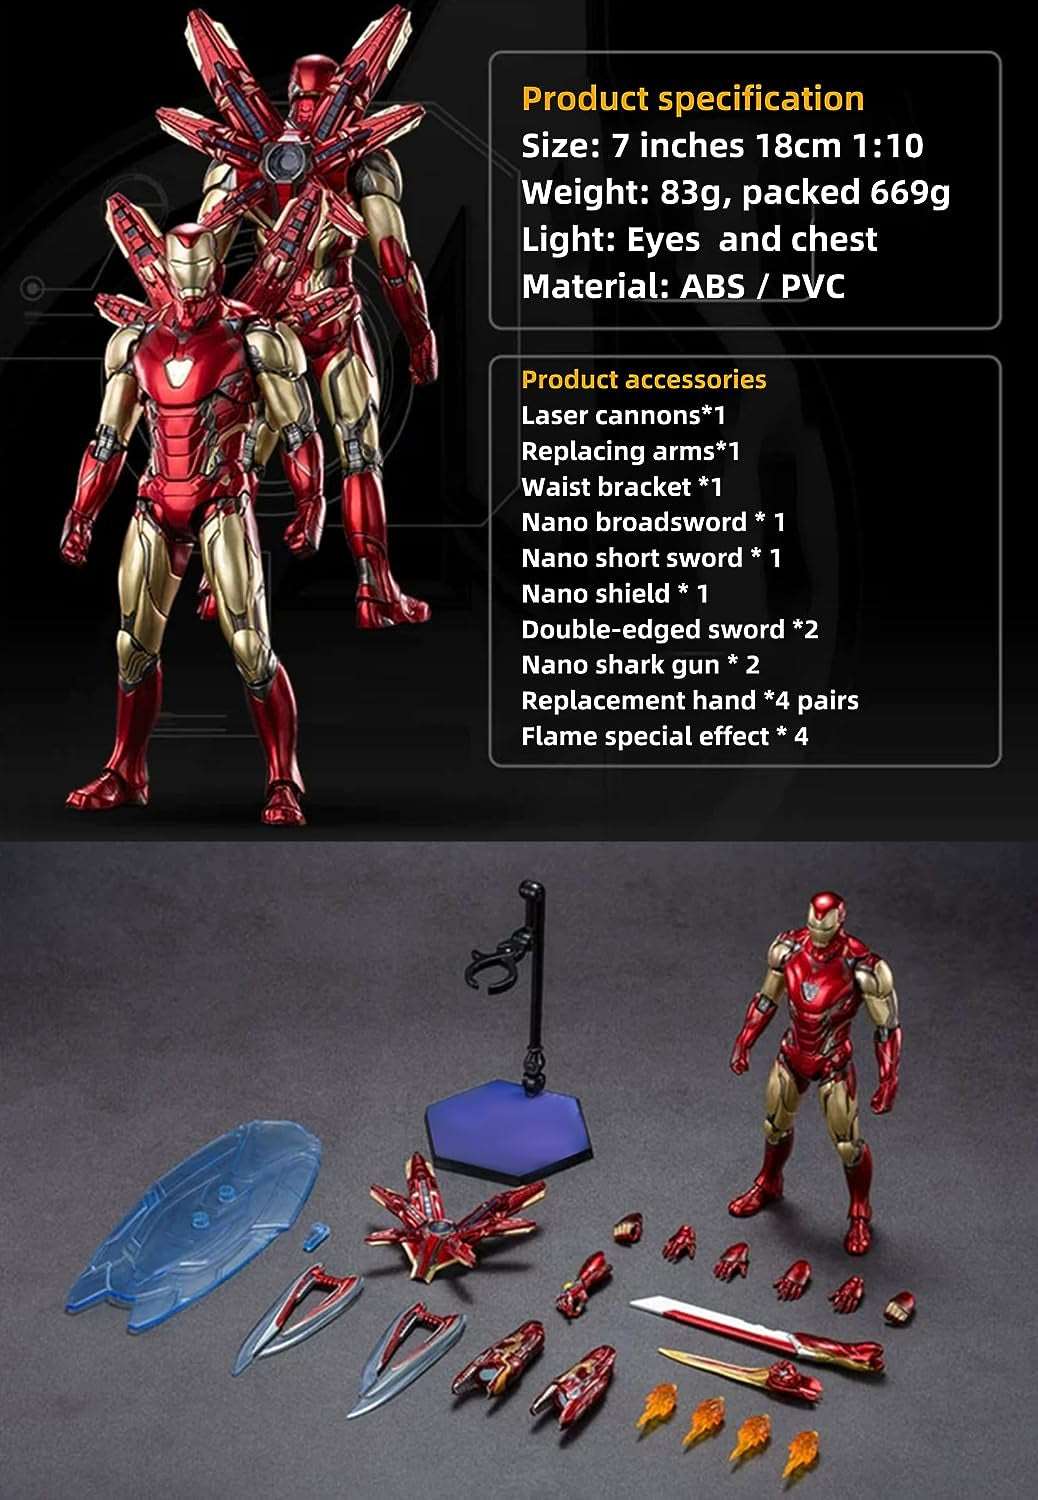 Ironman MK85 (Deluxe Version),7 Inch Collectible Action Figure with Multi Weapon Accessories,Light with Chest and Eyes,Exquisite Painting 20 Joints Movable Toy (1/10 Scale)